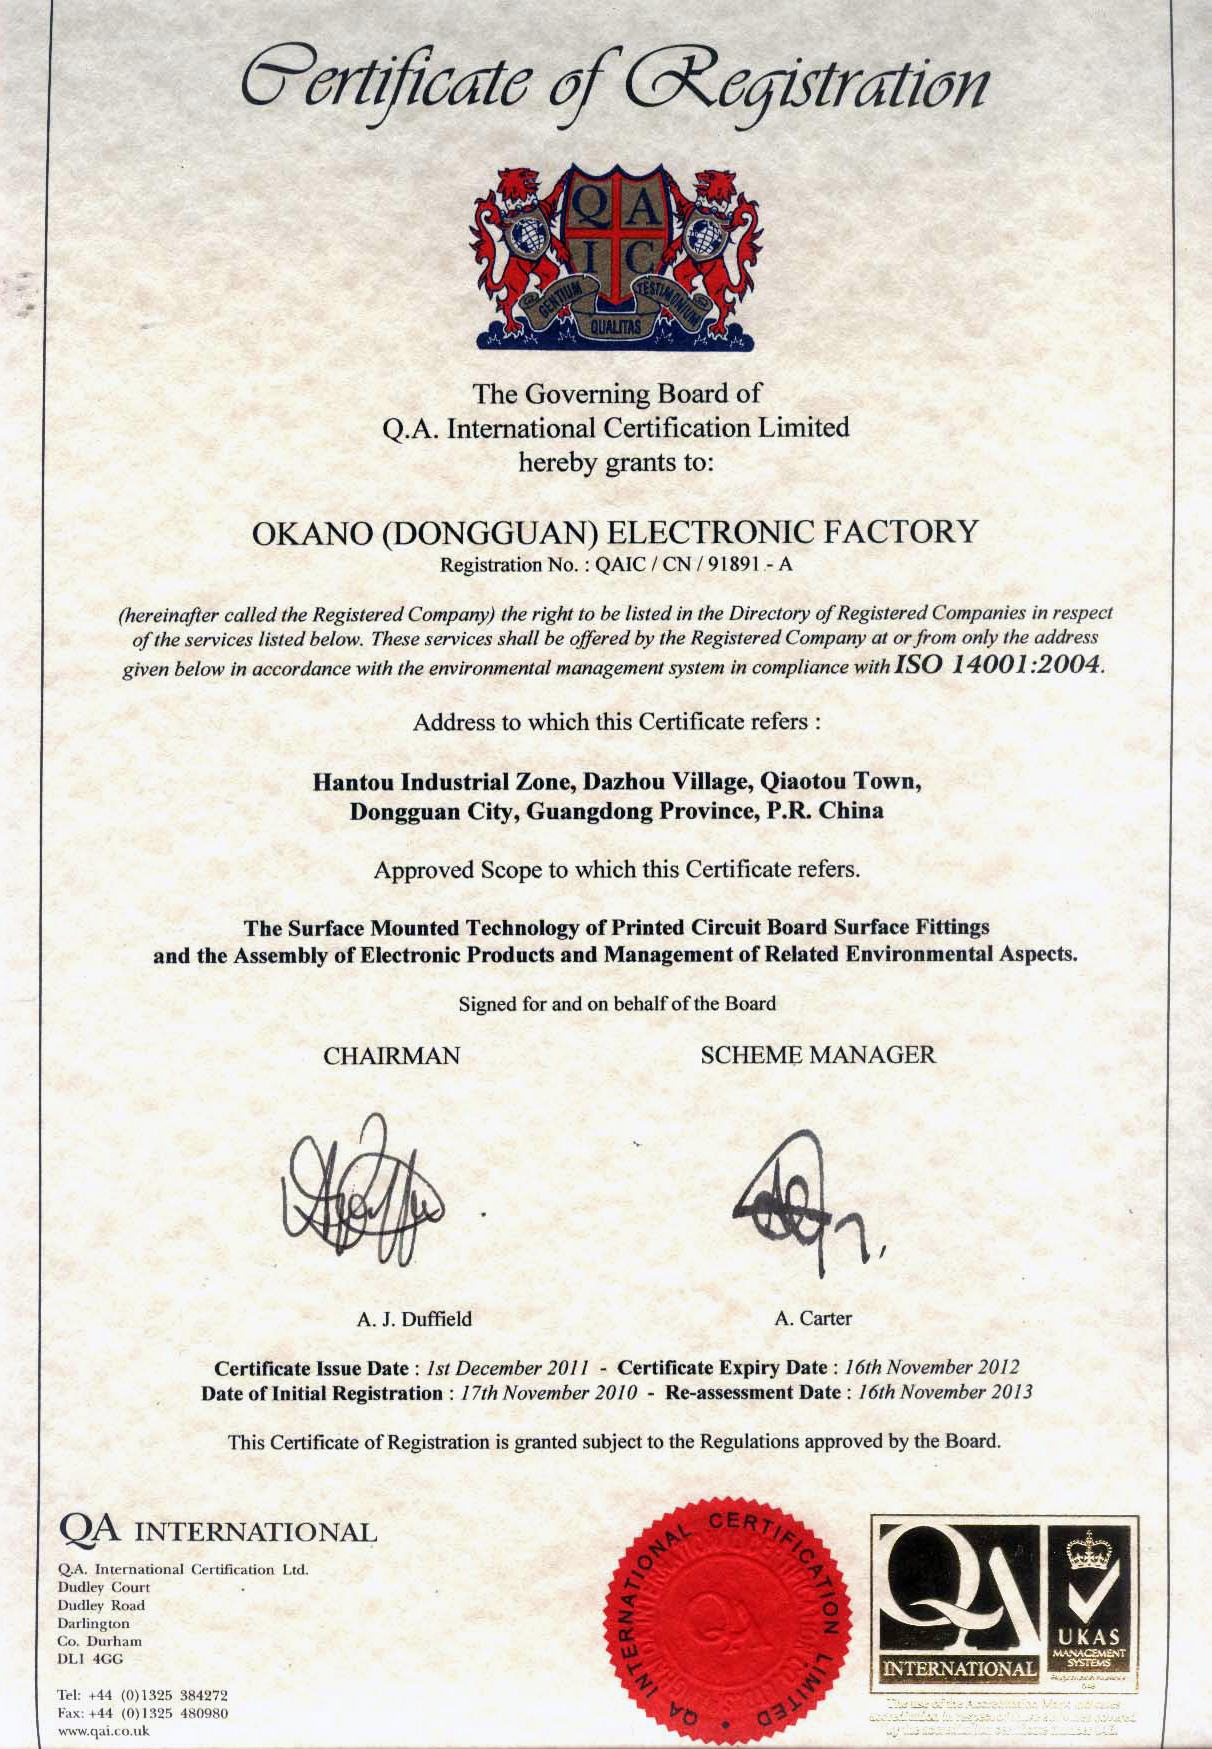 This is certificate of ISO14001 English language for OKTEK smt pcba first manufacturer